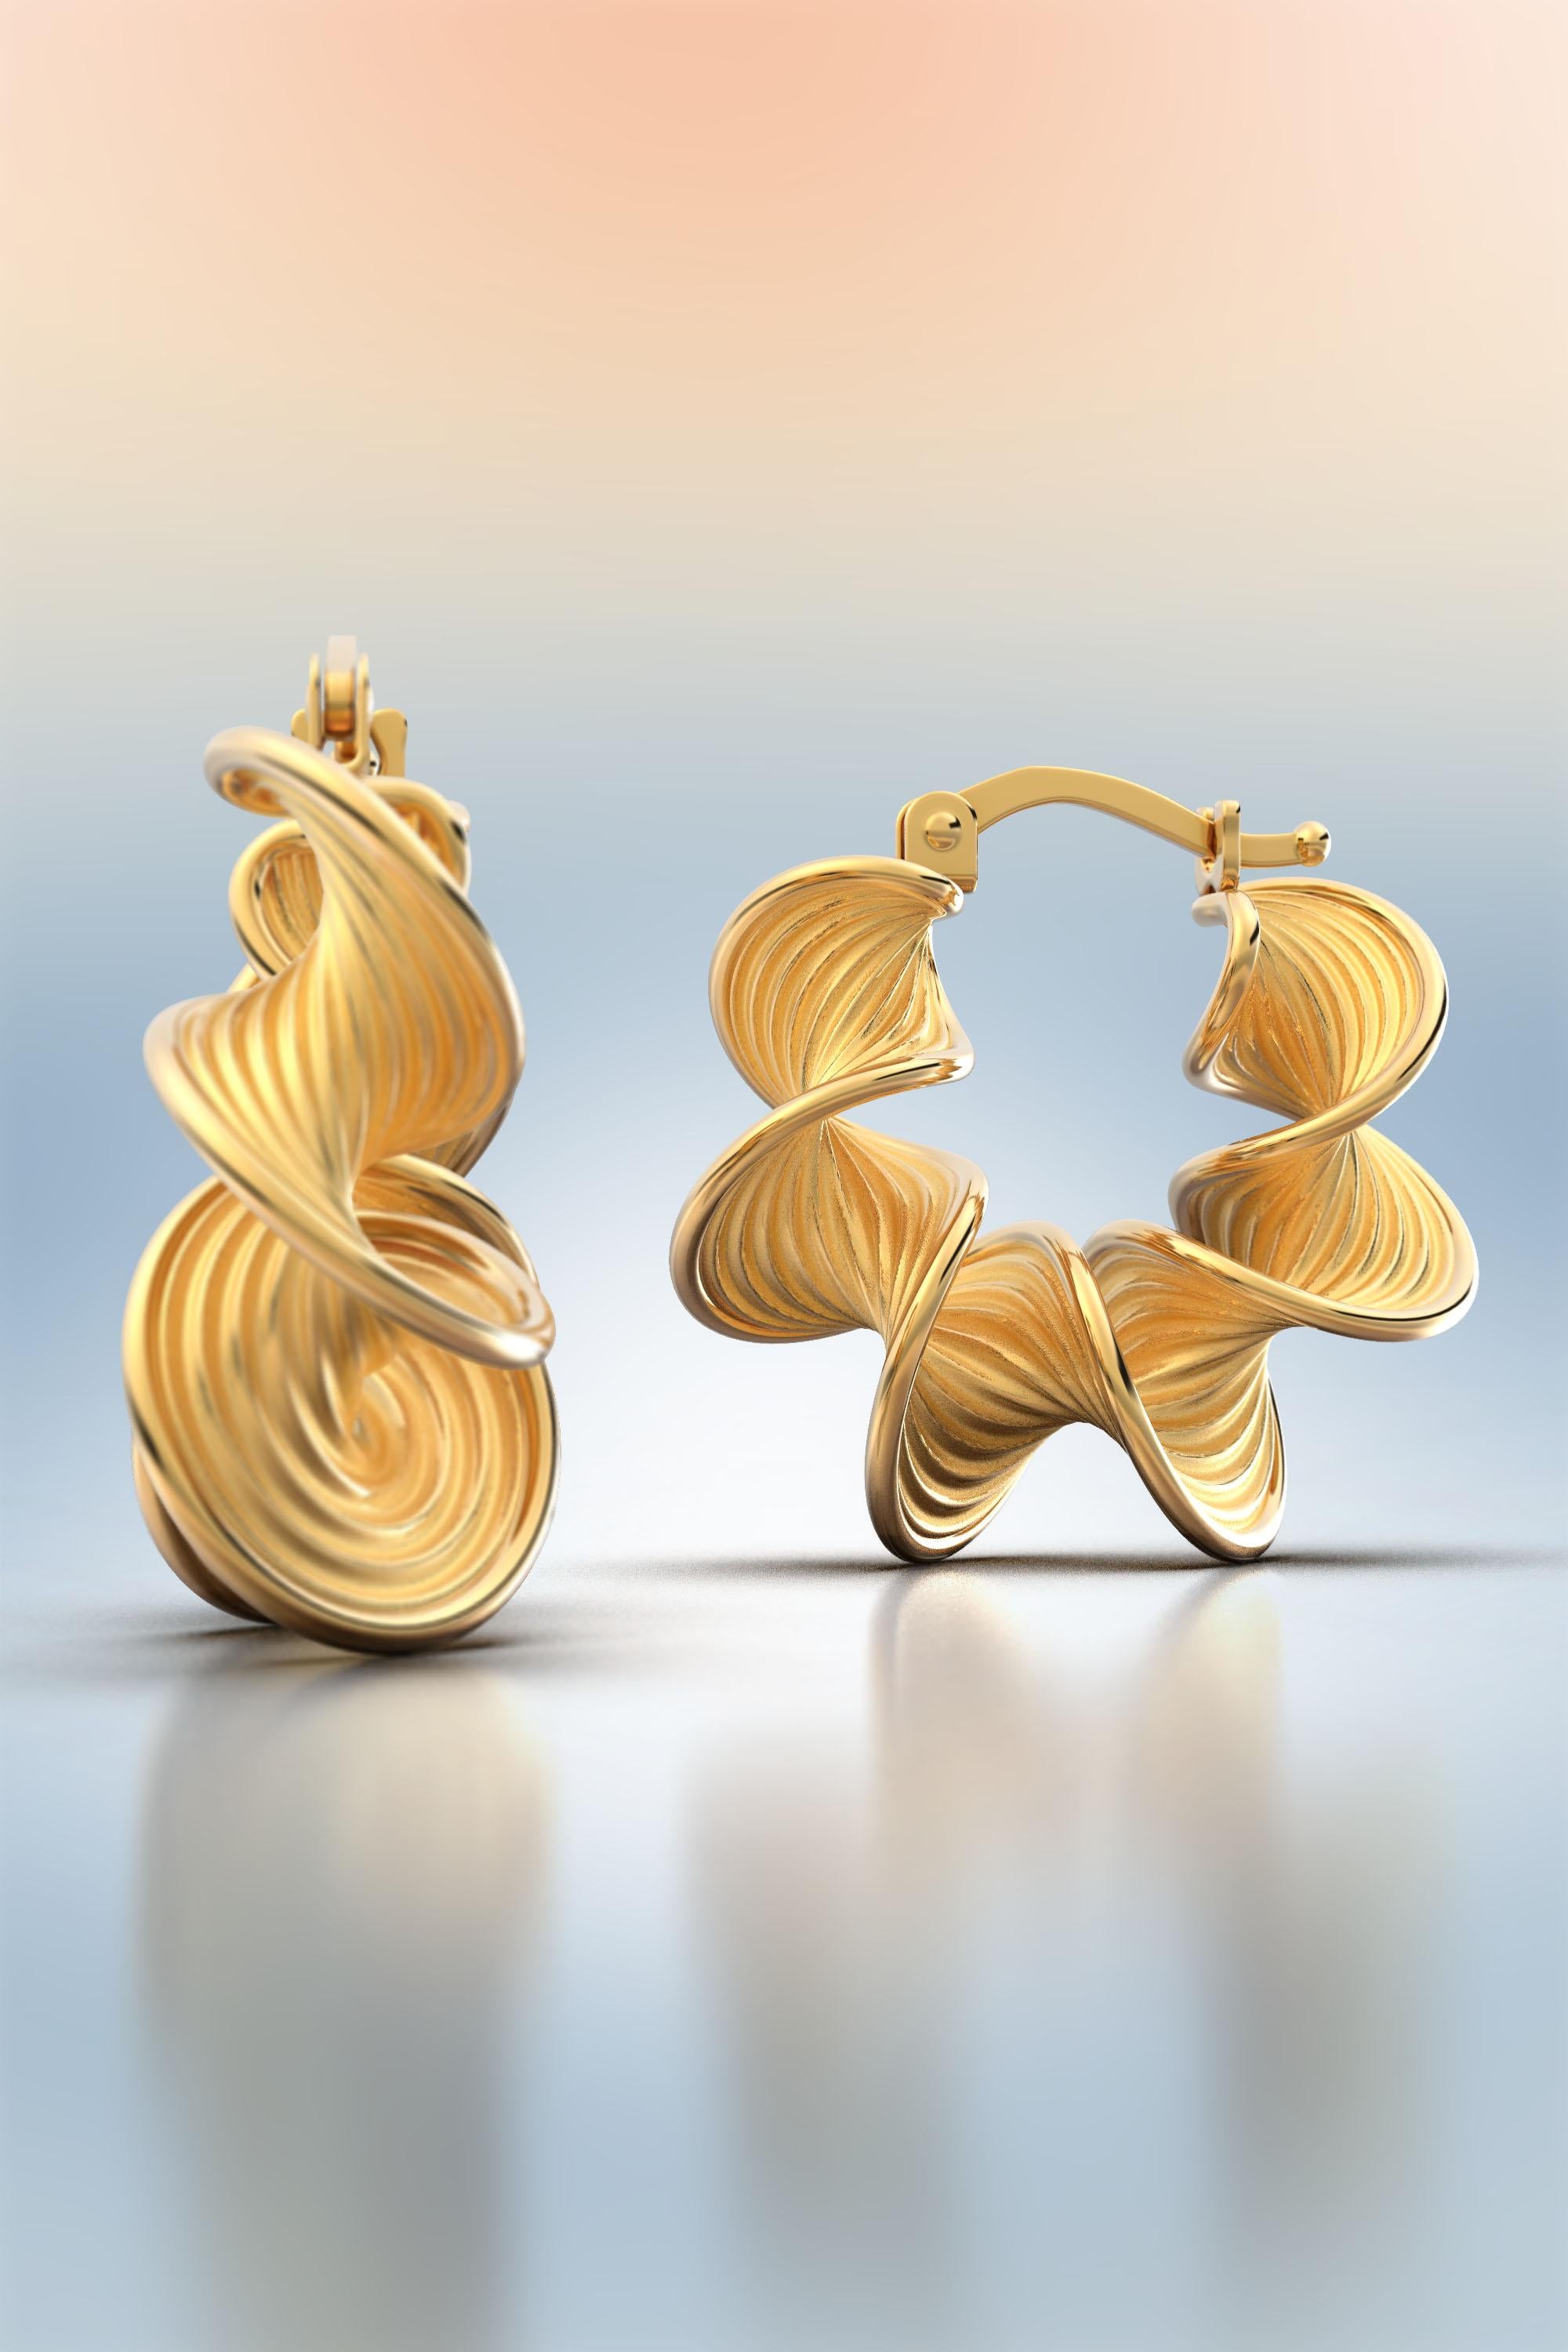 Contemporary 18k Twisted Gold Hoop Earrings Designed and Crafted in Italy For Sale